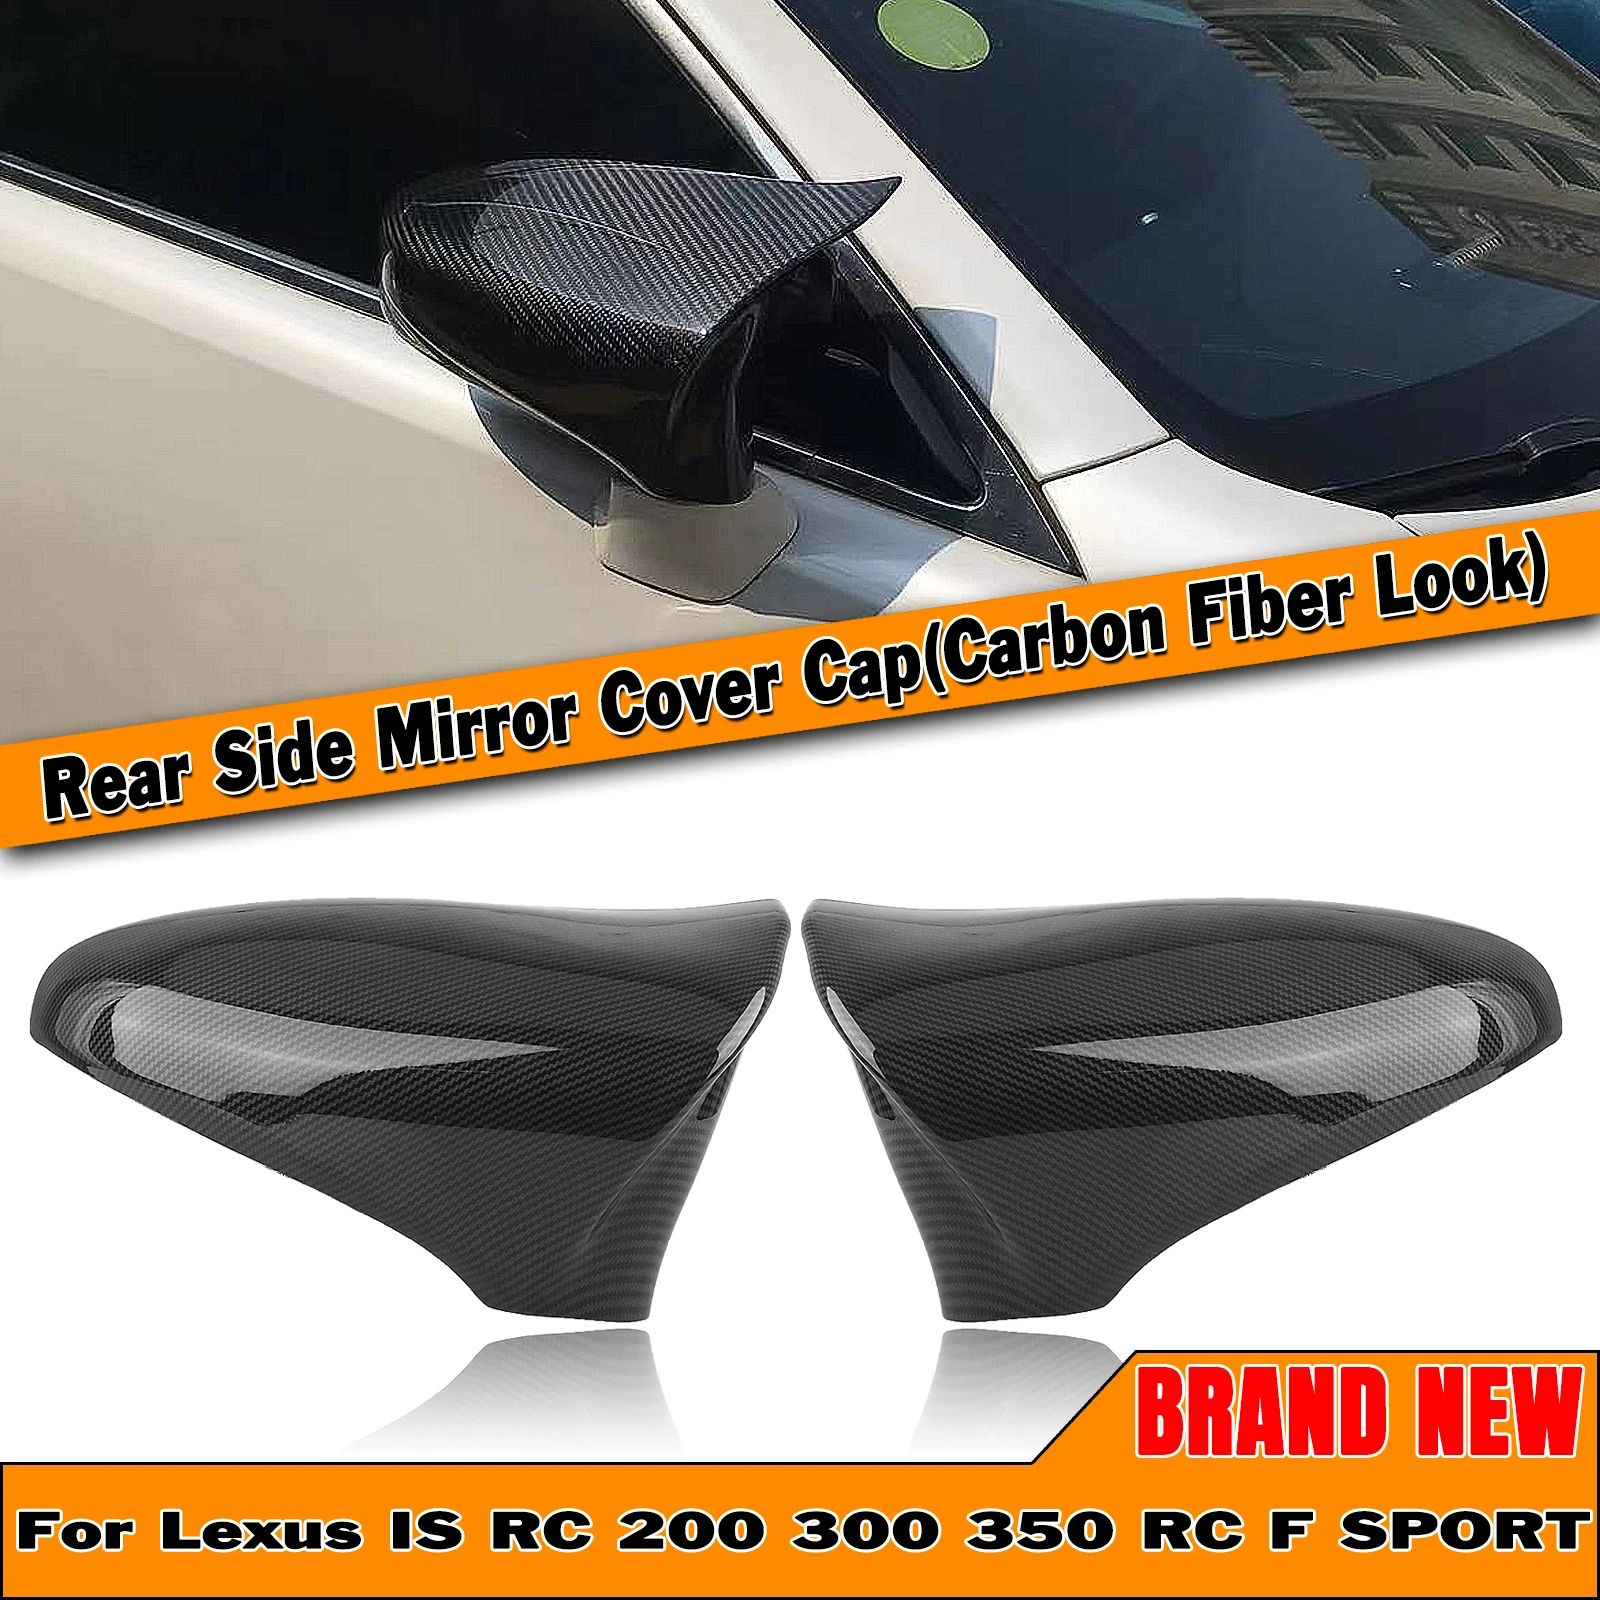 

For Lexus IS200 250 300 RC 200 300 350 RC F SPORT IS CT ES LS GS Mirror Cover Carbon Fiber Look/Gloss Black Rear View Cap Shell